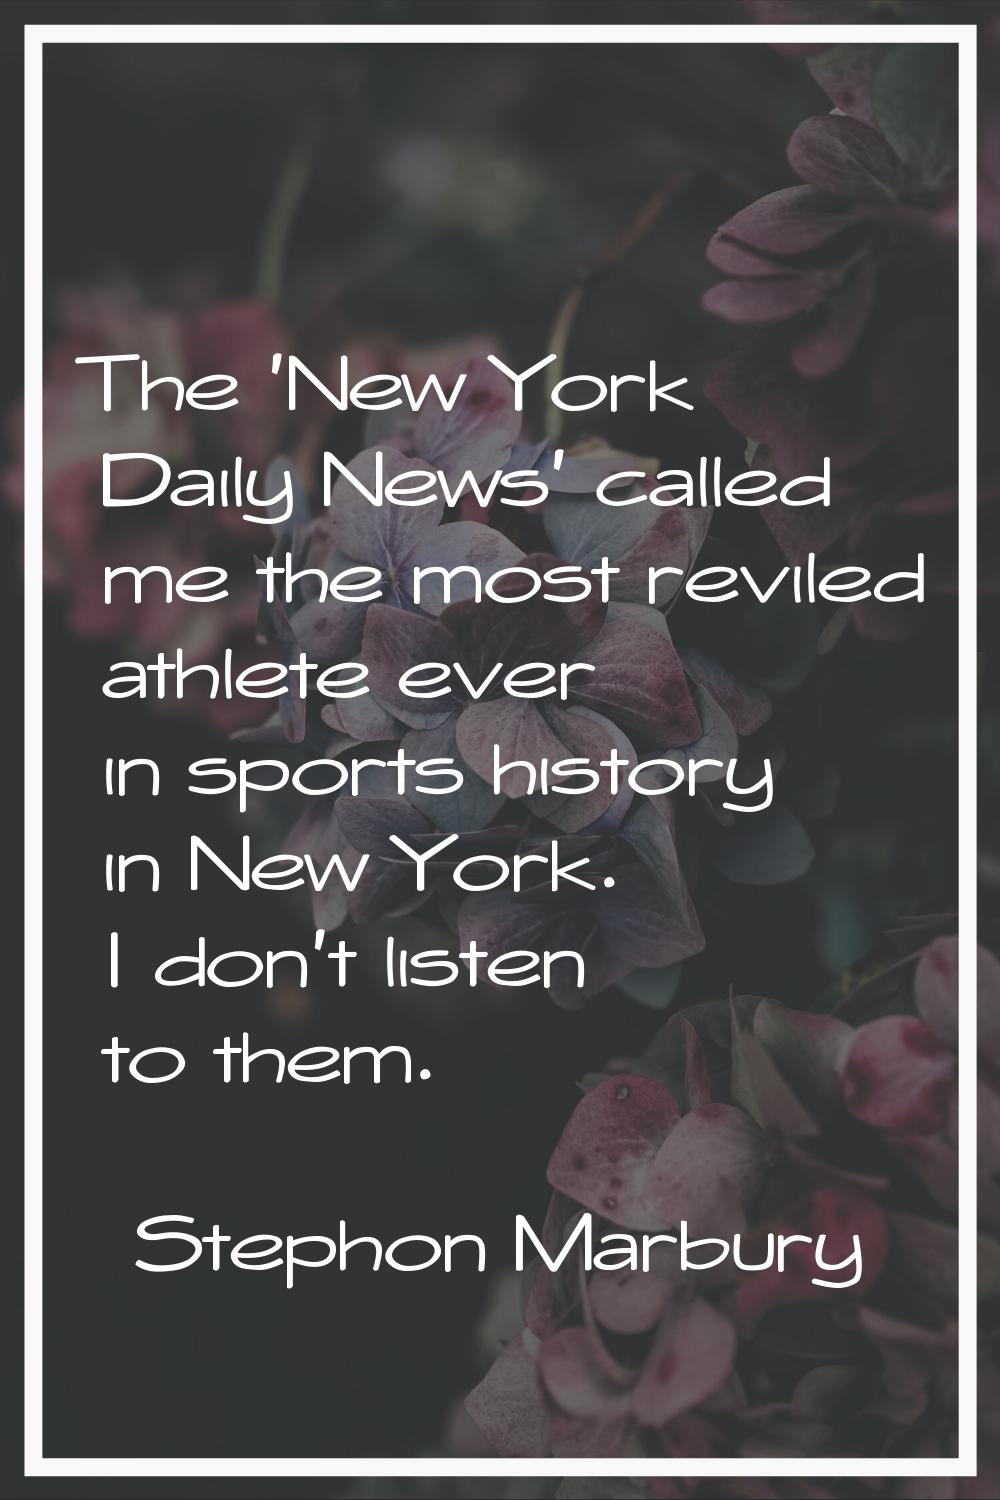 The 'New York Daily News' called me the most reviled athlete ever in sports history in New York. I 